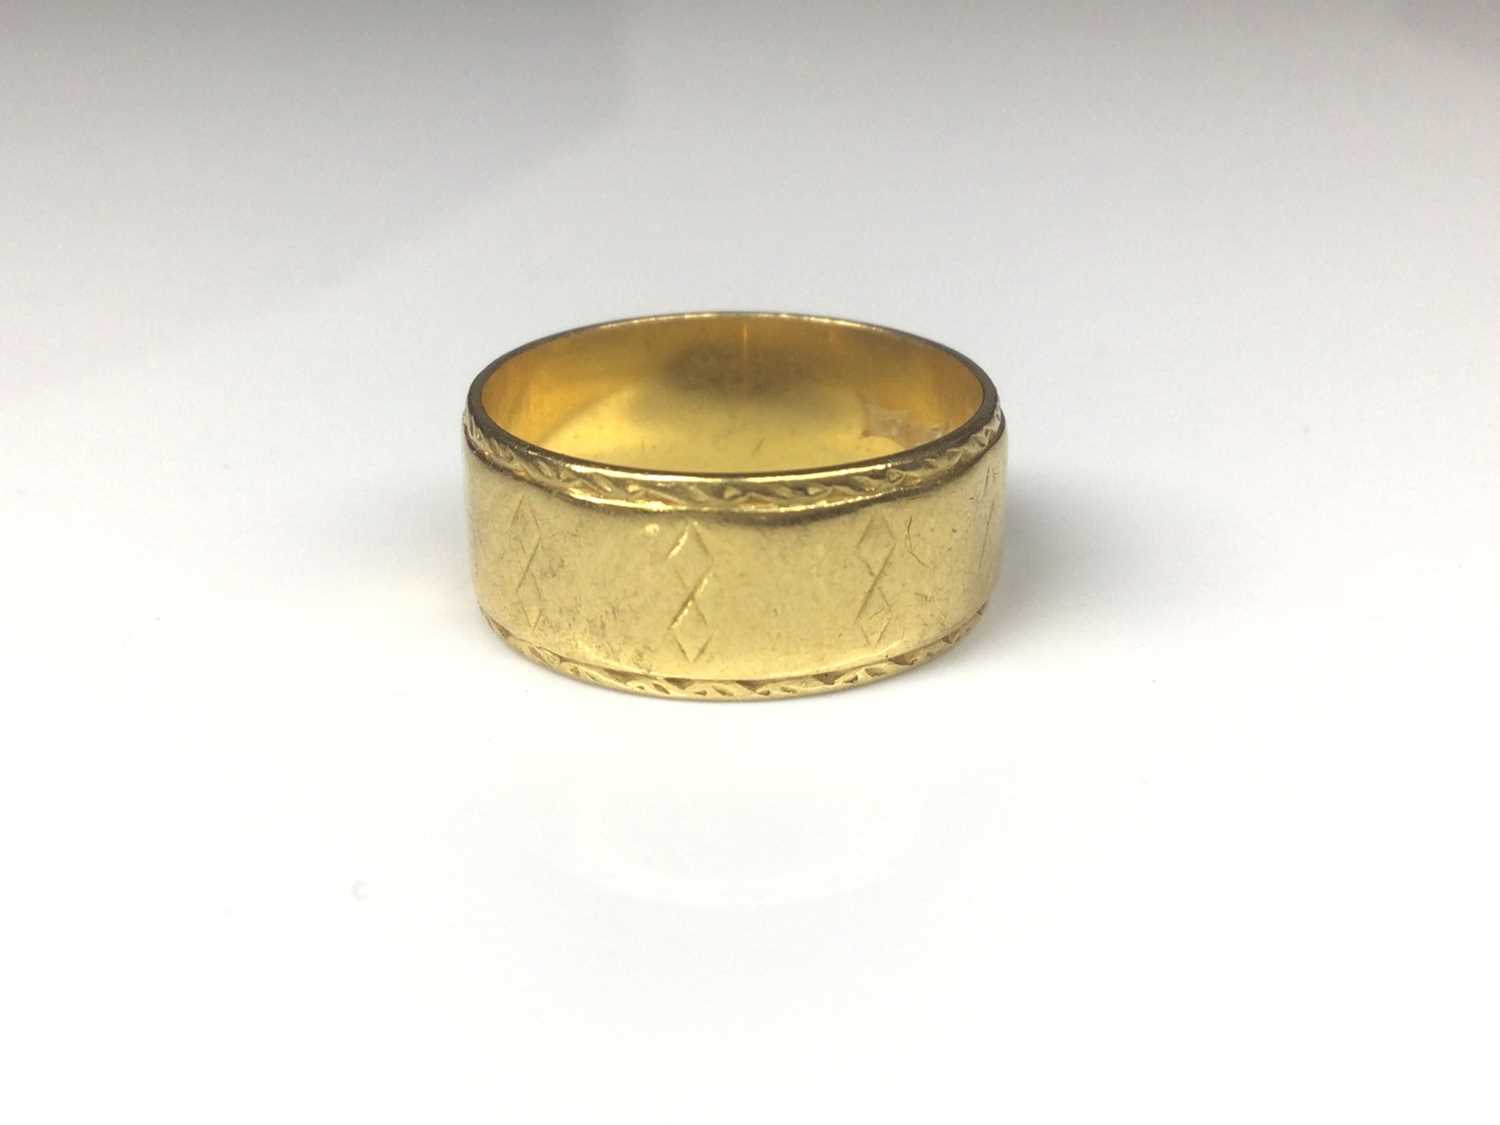 22ct gold wide band wedding ring with engraved geometric decoration